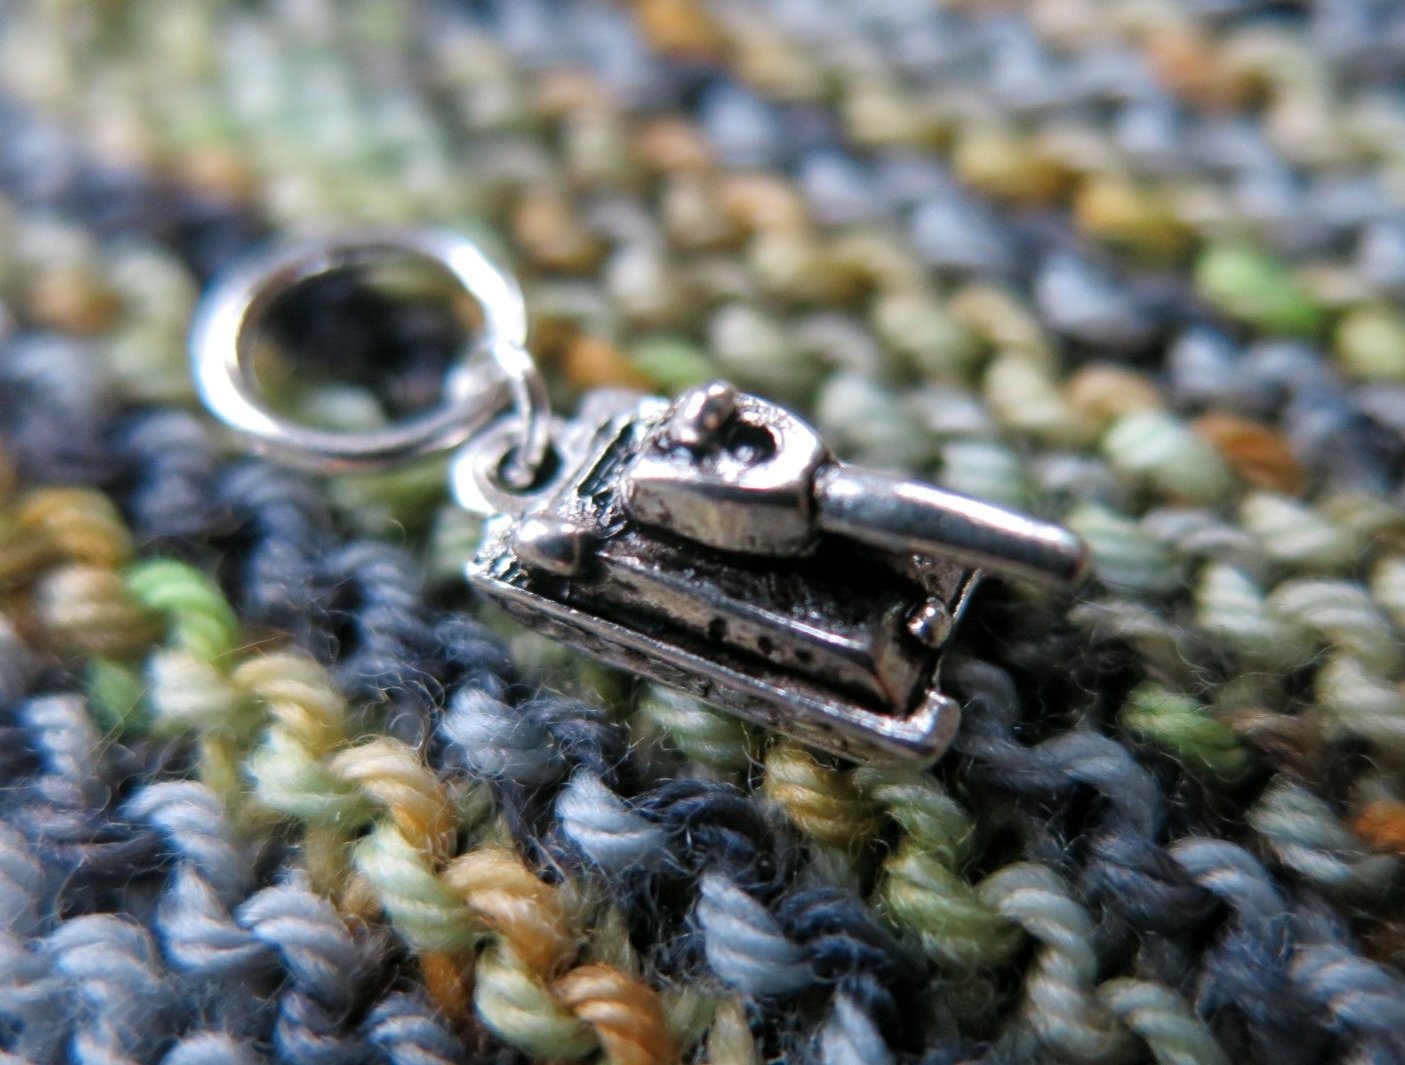 3d army tank charm on a snagless jump ring for knitting